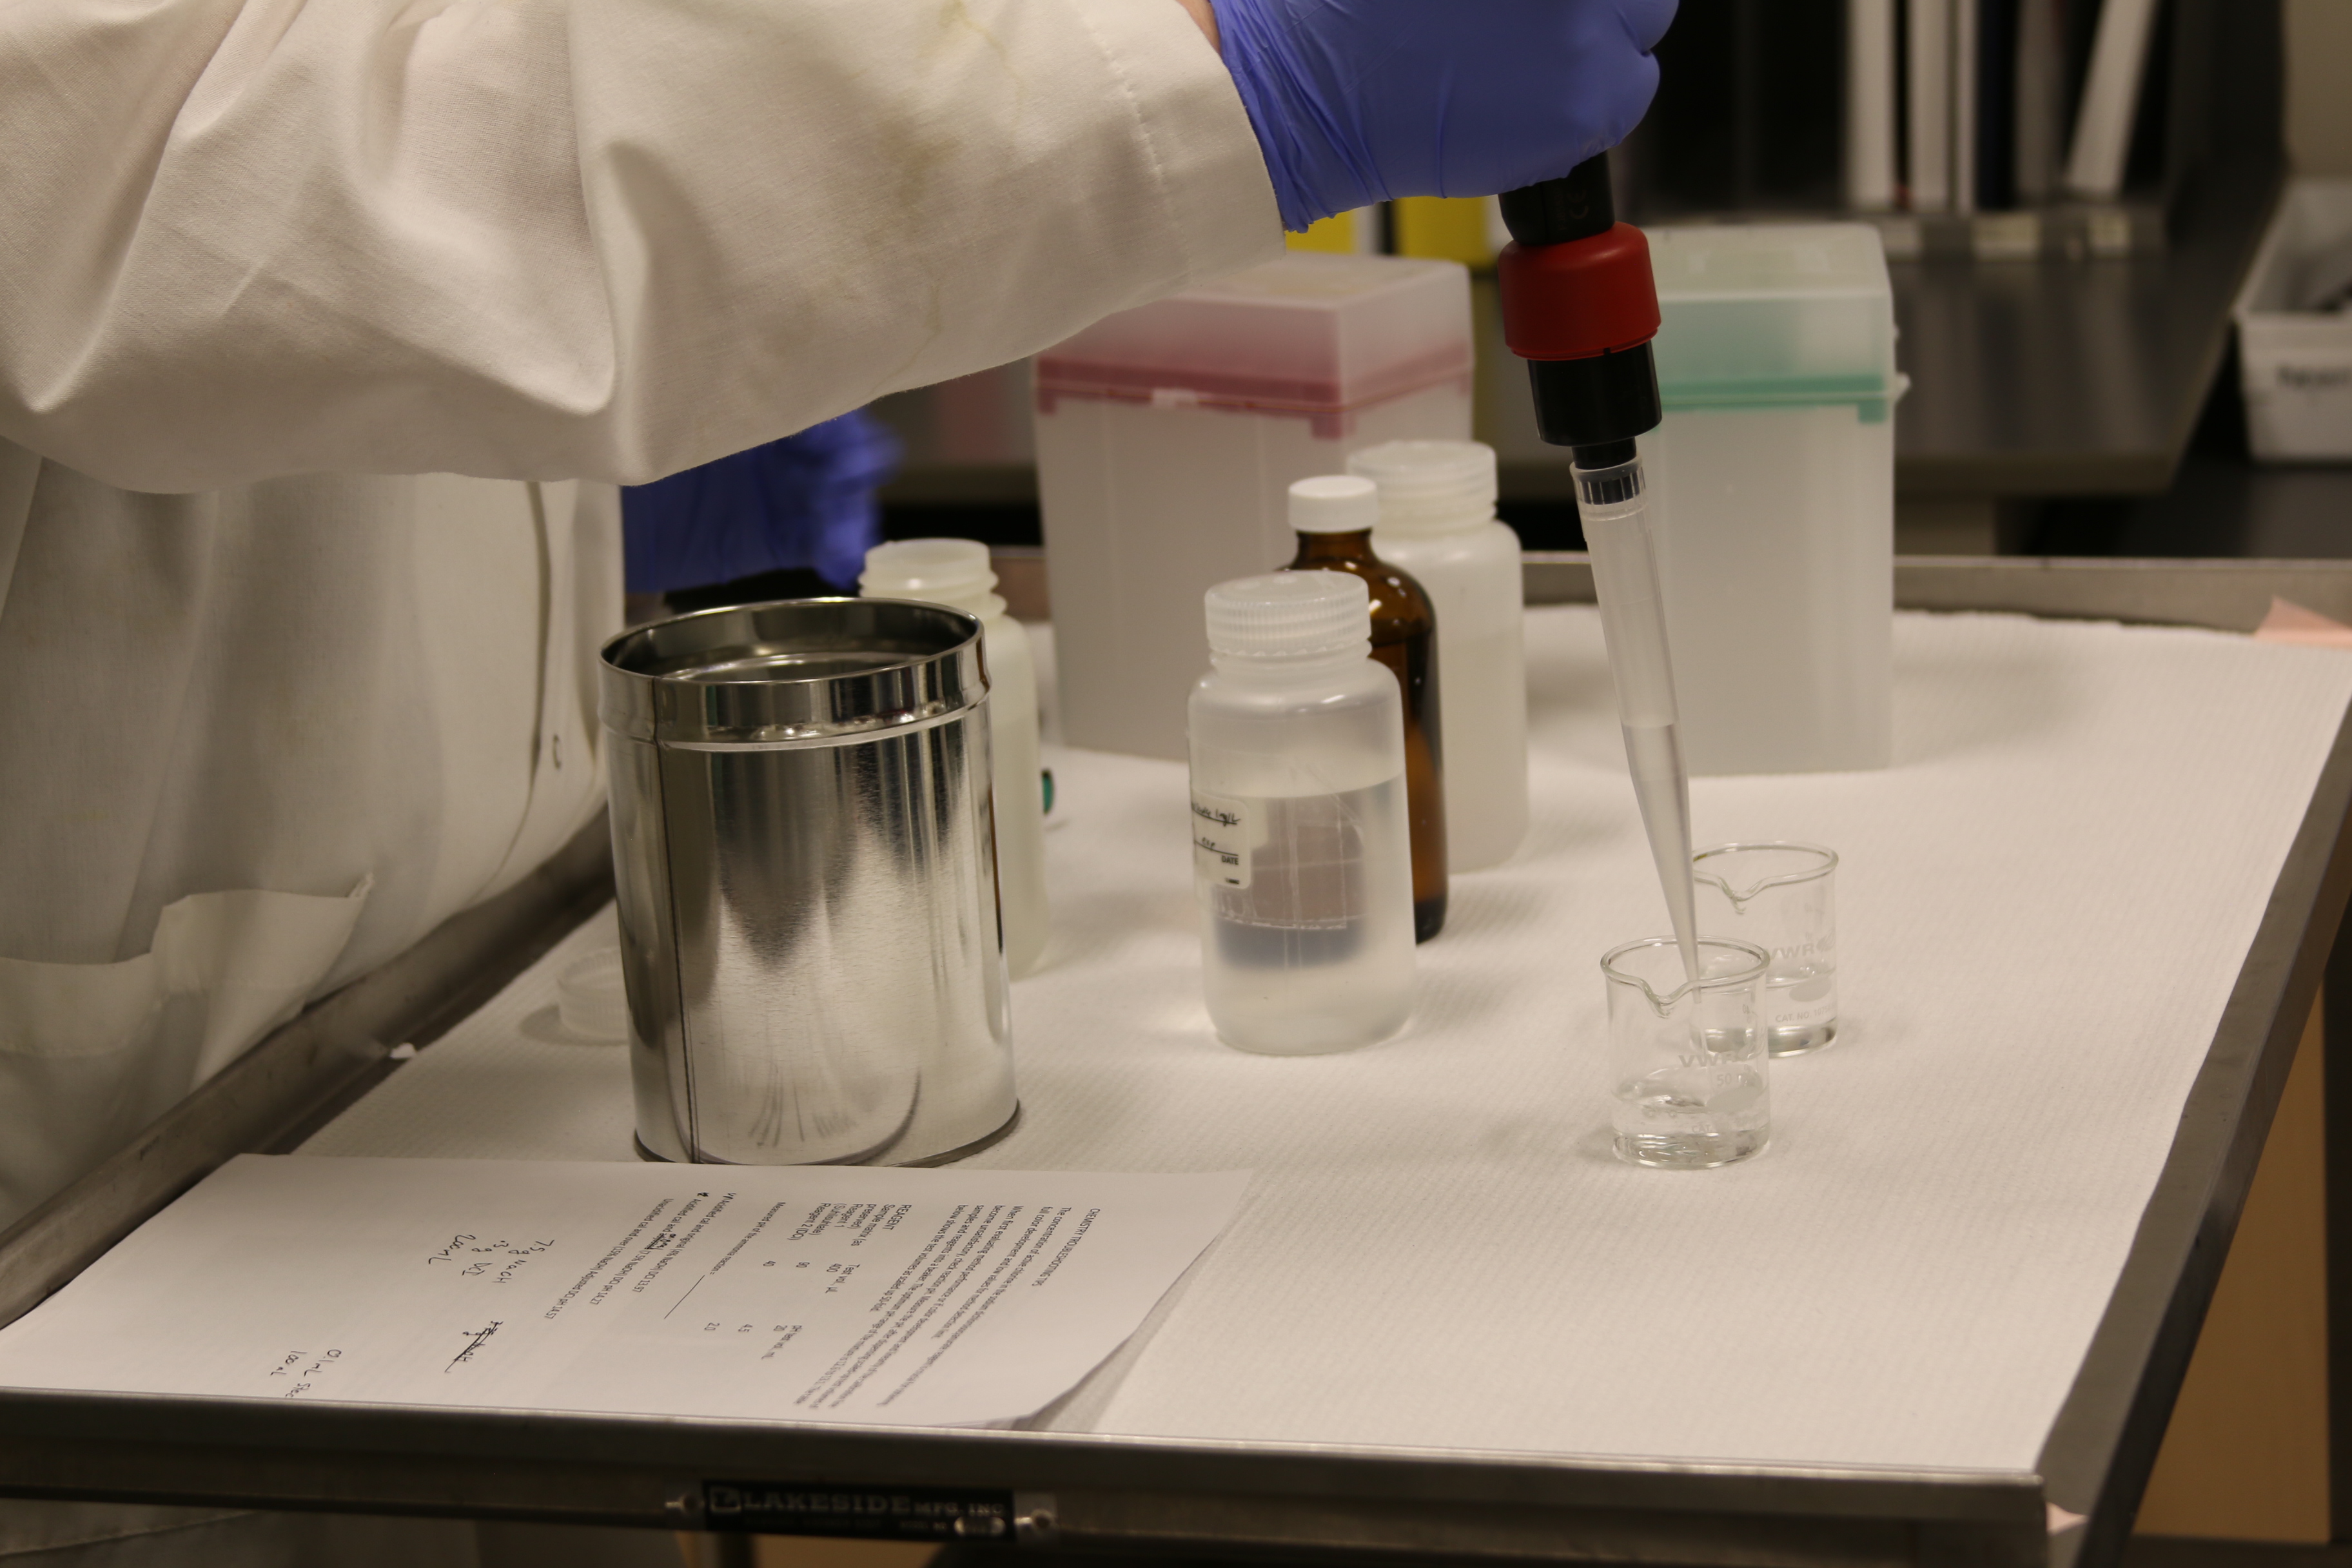 Person in blue gloves and white lab coat uses a large pipette to transfer clear liquid into two small beakers